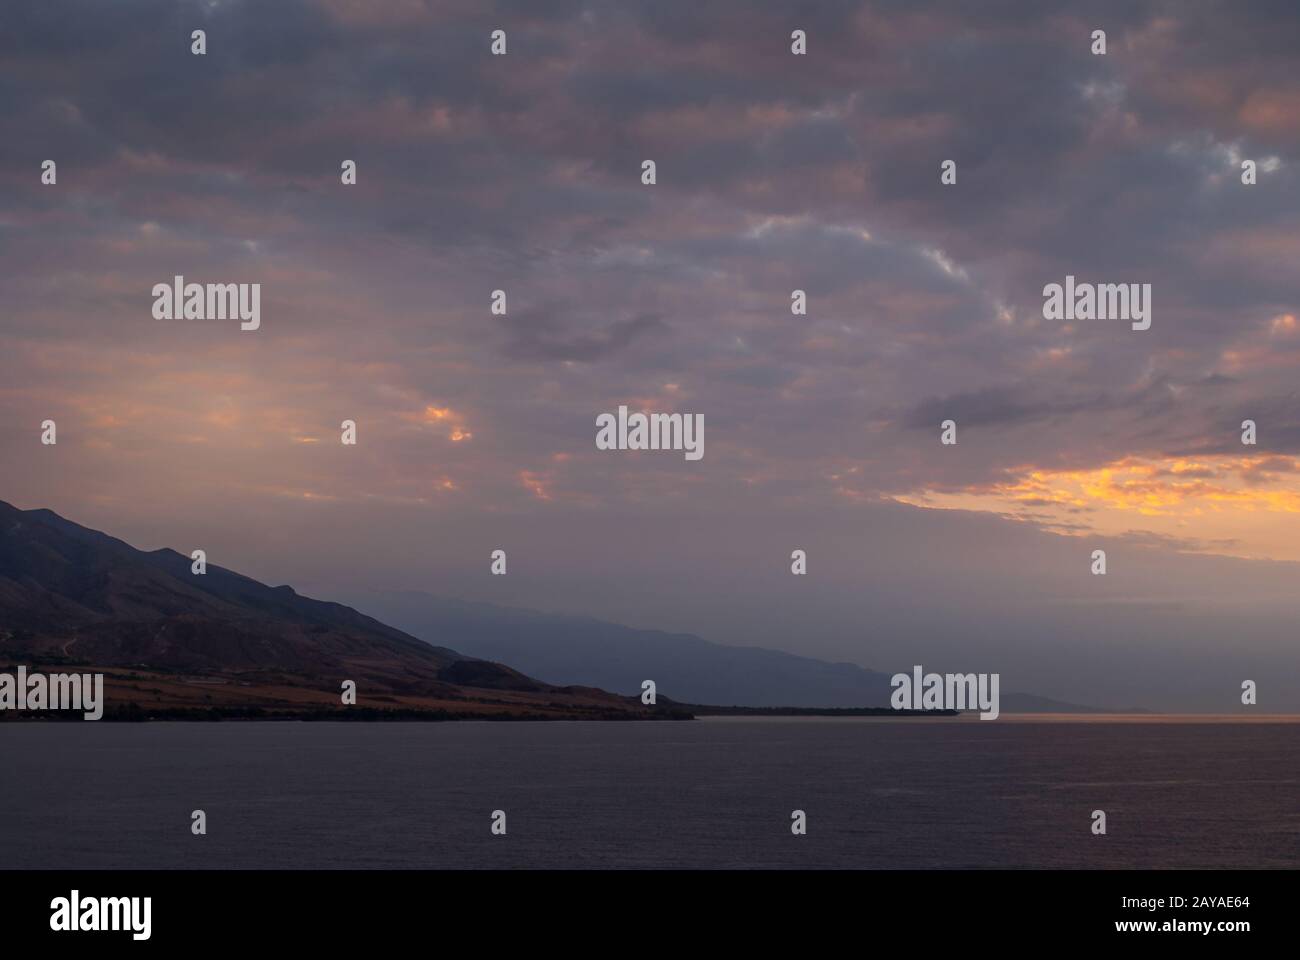 Lahaina, Maui, Hawaii, USA. - January 12 2012: Early morning light over ocean while approacing West side on dark ocean under spectacular cloudscape as Stock Photo